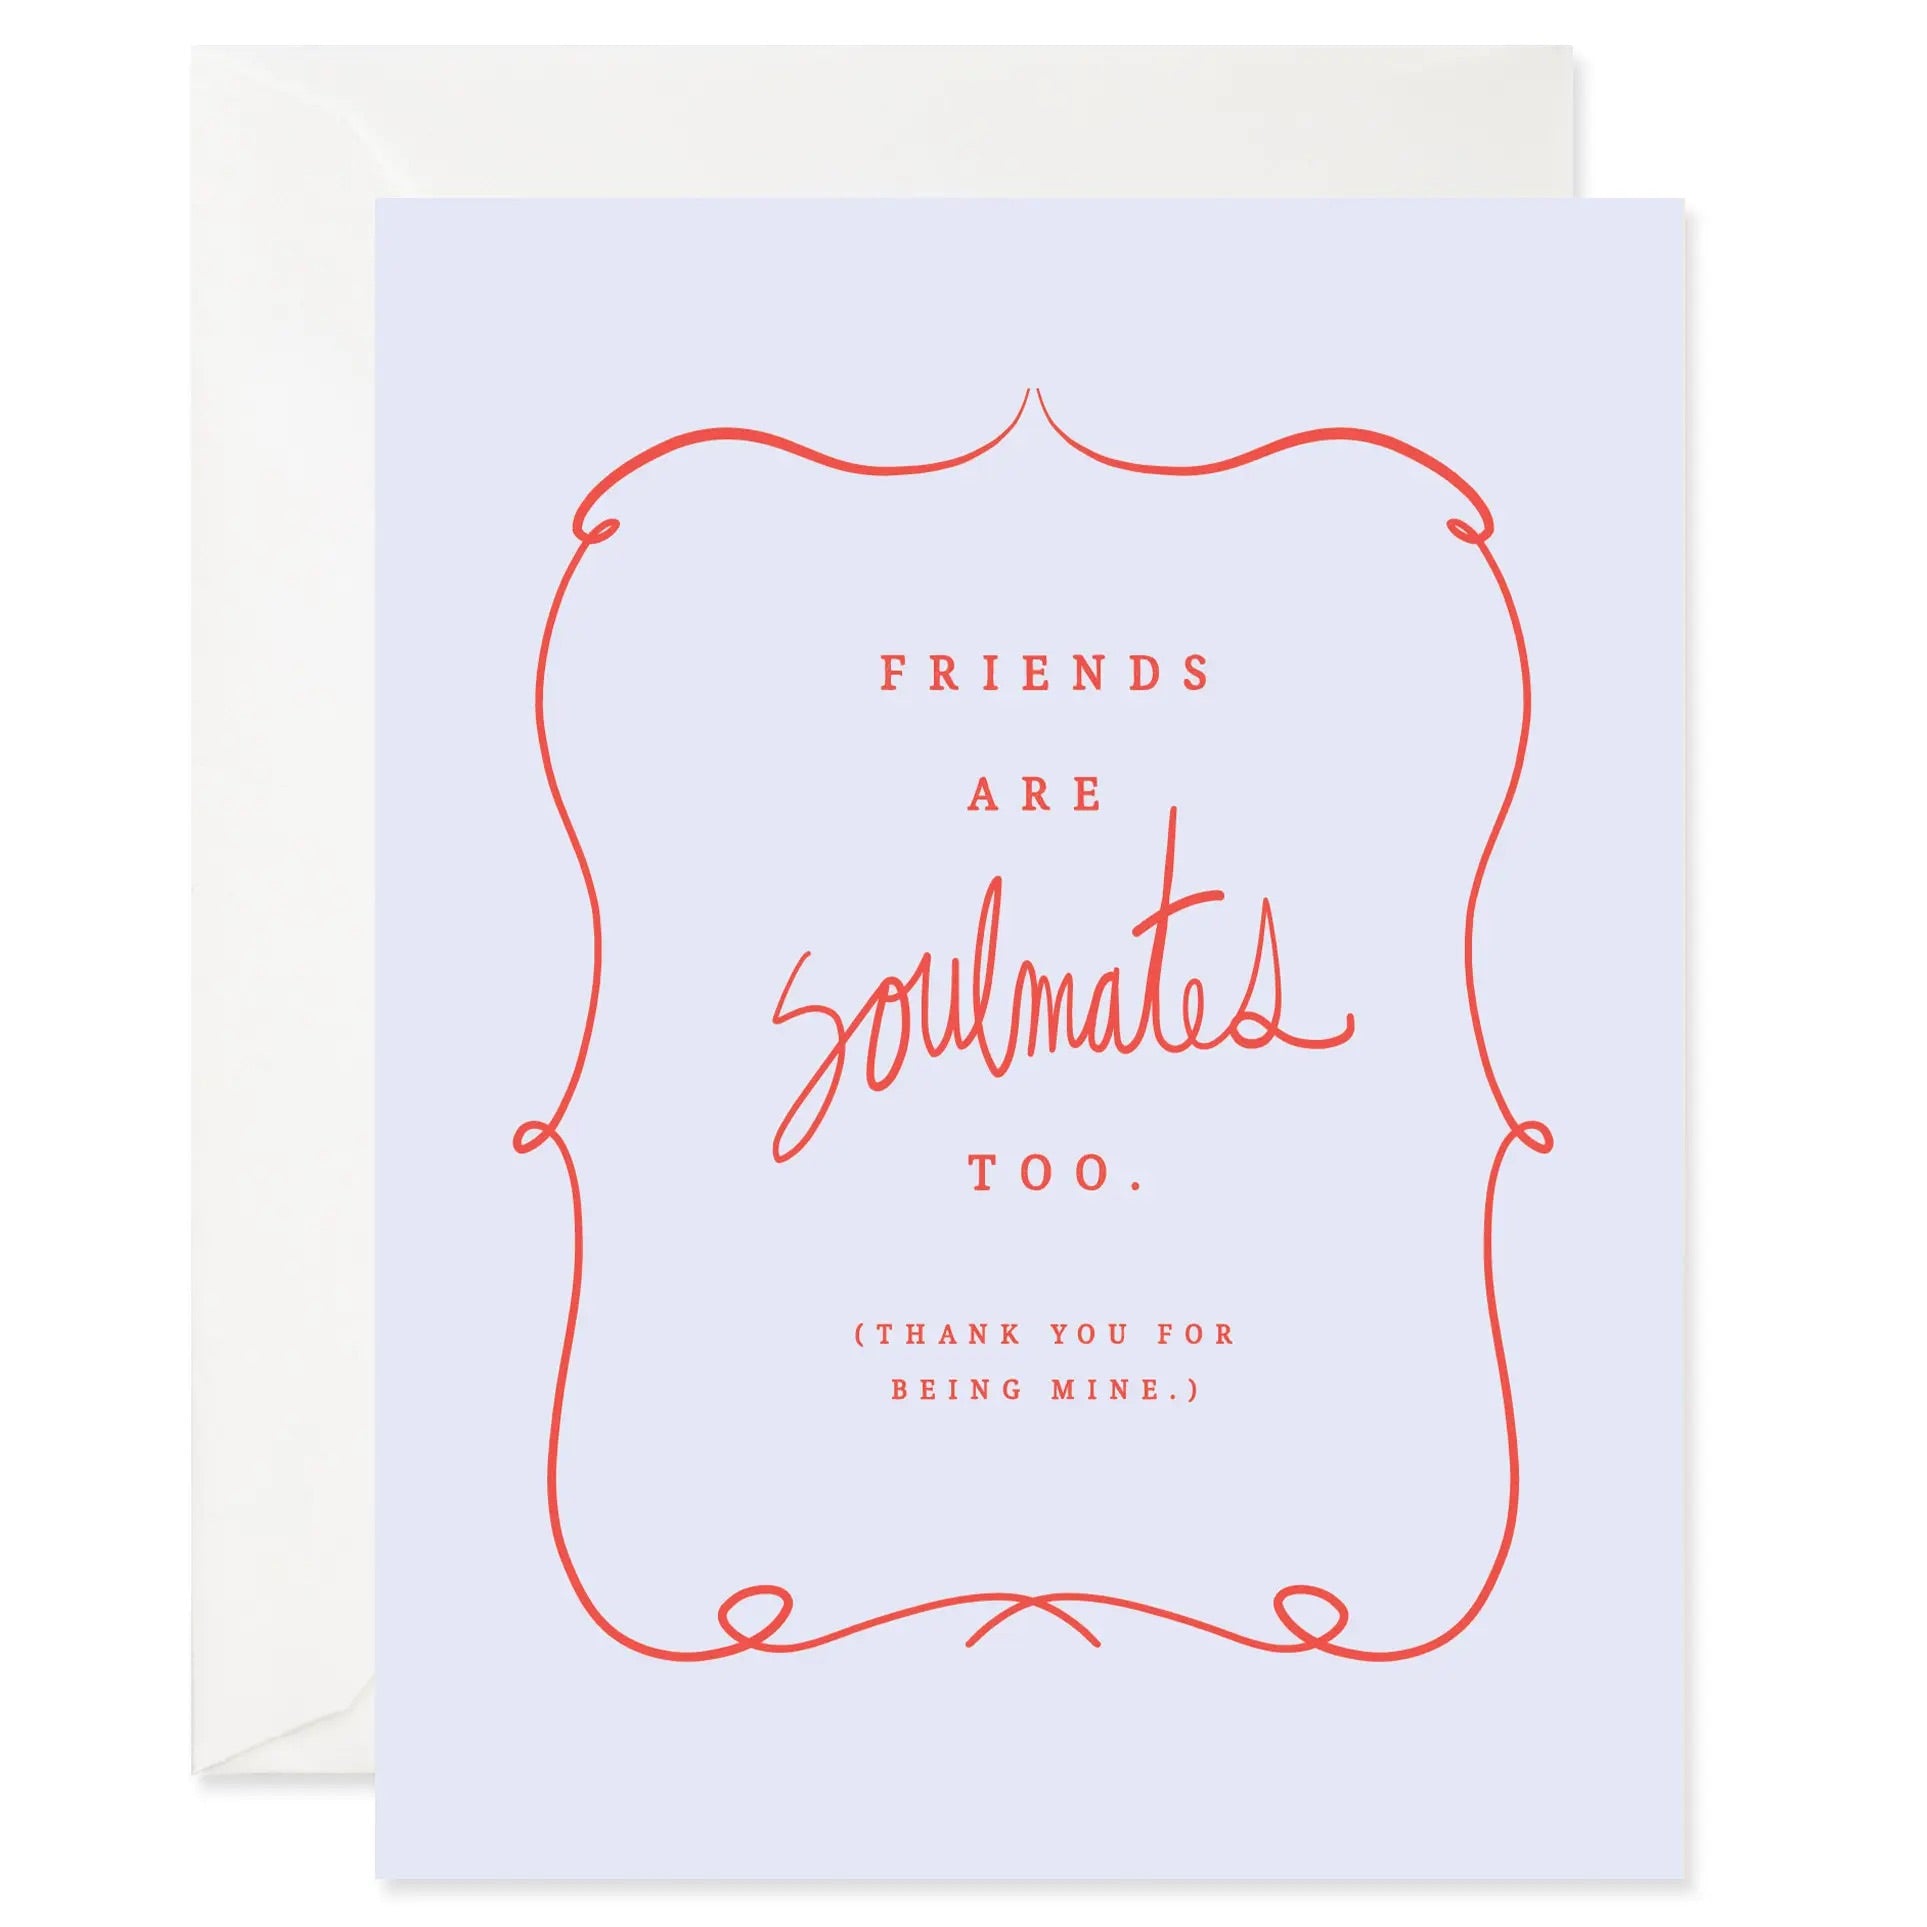 Friends Are Soulmates Too Card